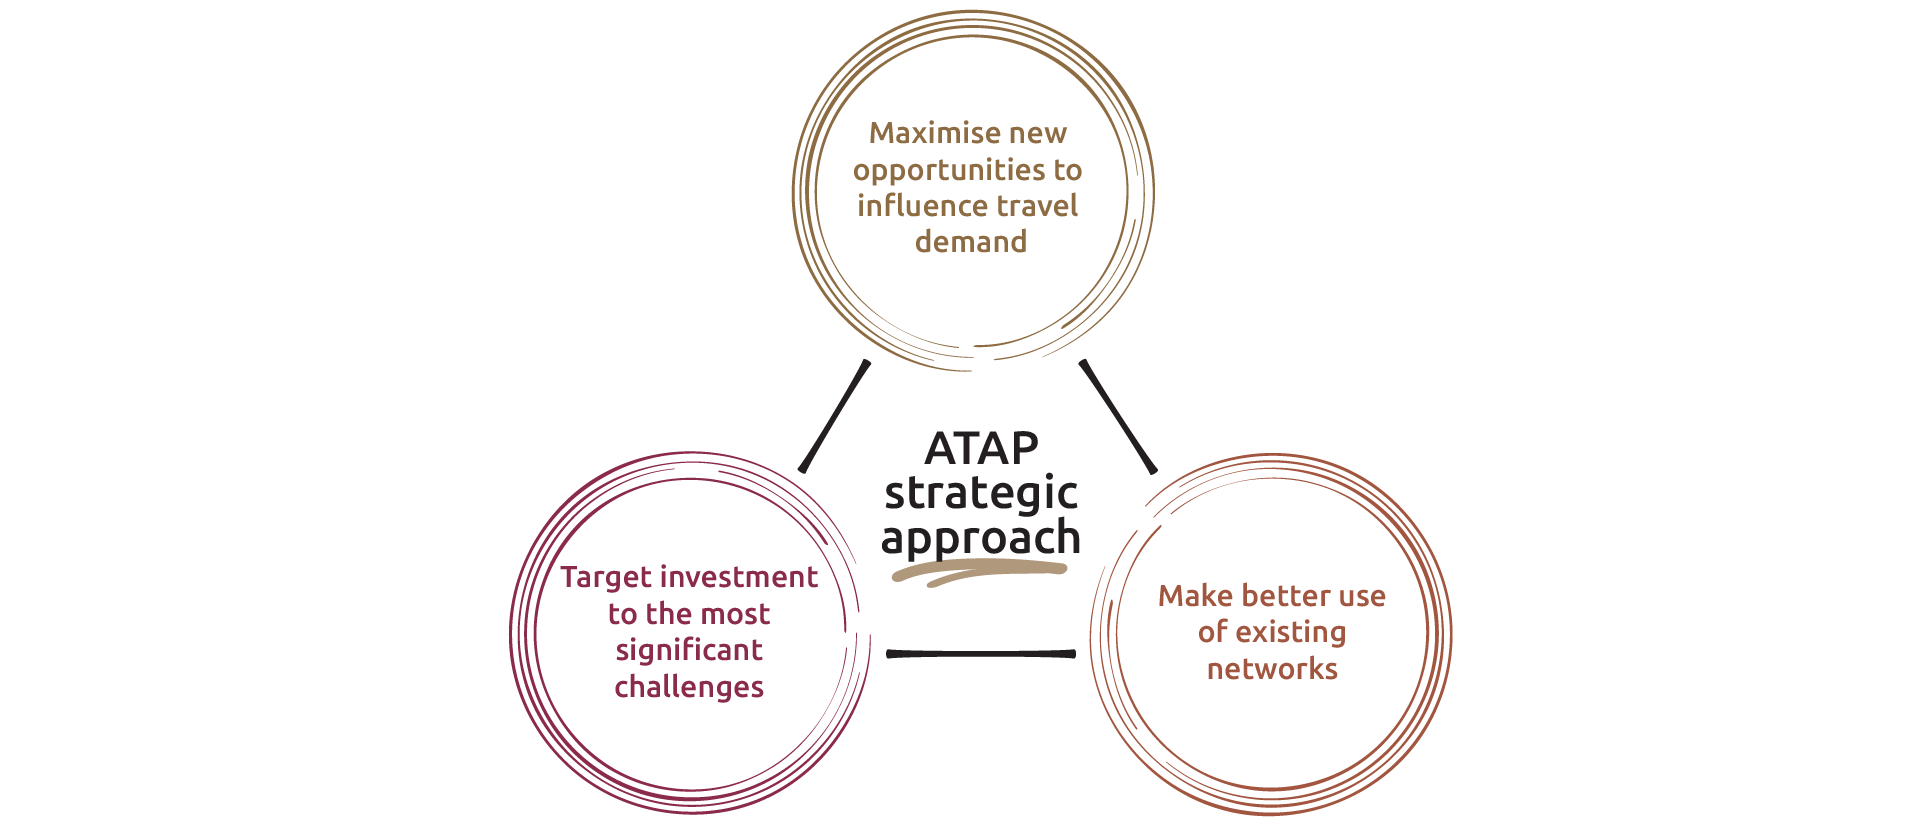 The ATAP strategic approach requires us to maximise new opportunities to influence travel demand, target investment to the most significant challenges and to make better use of existing networks.